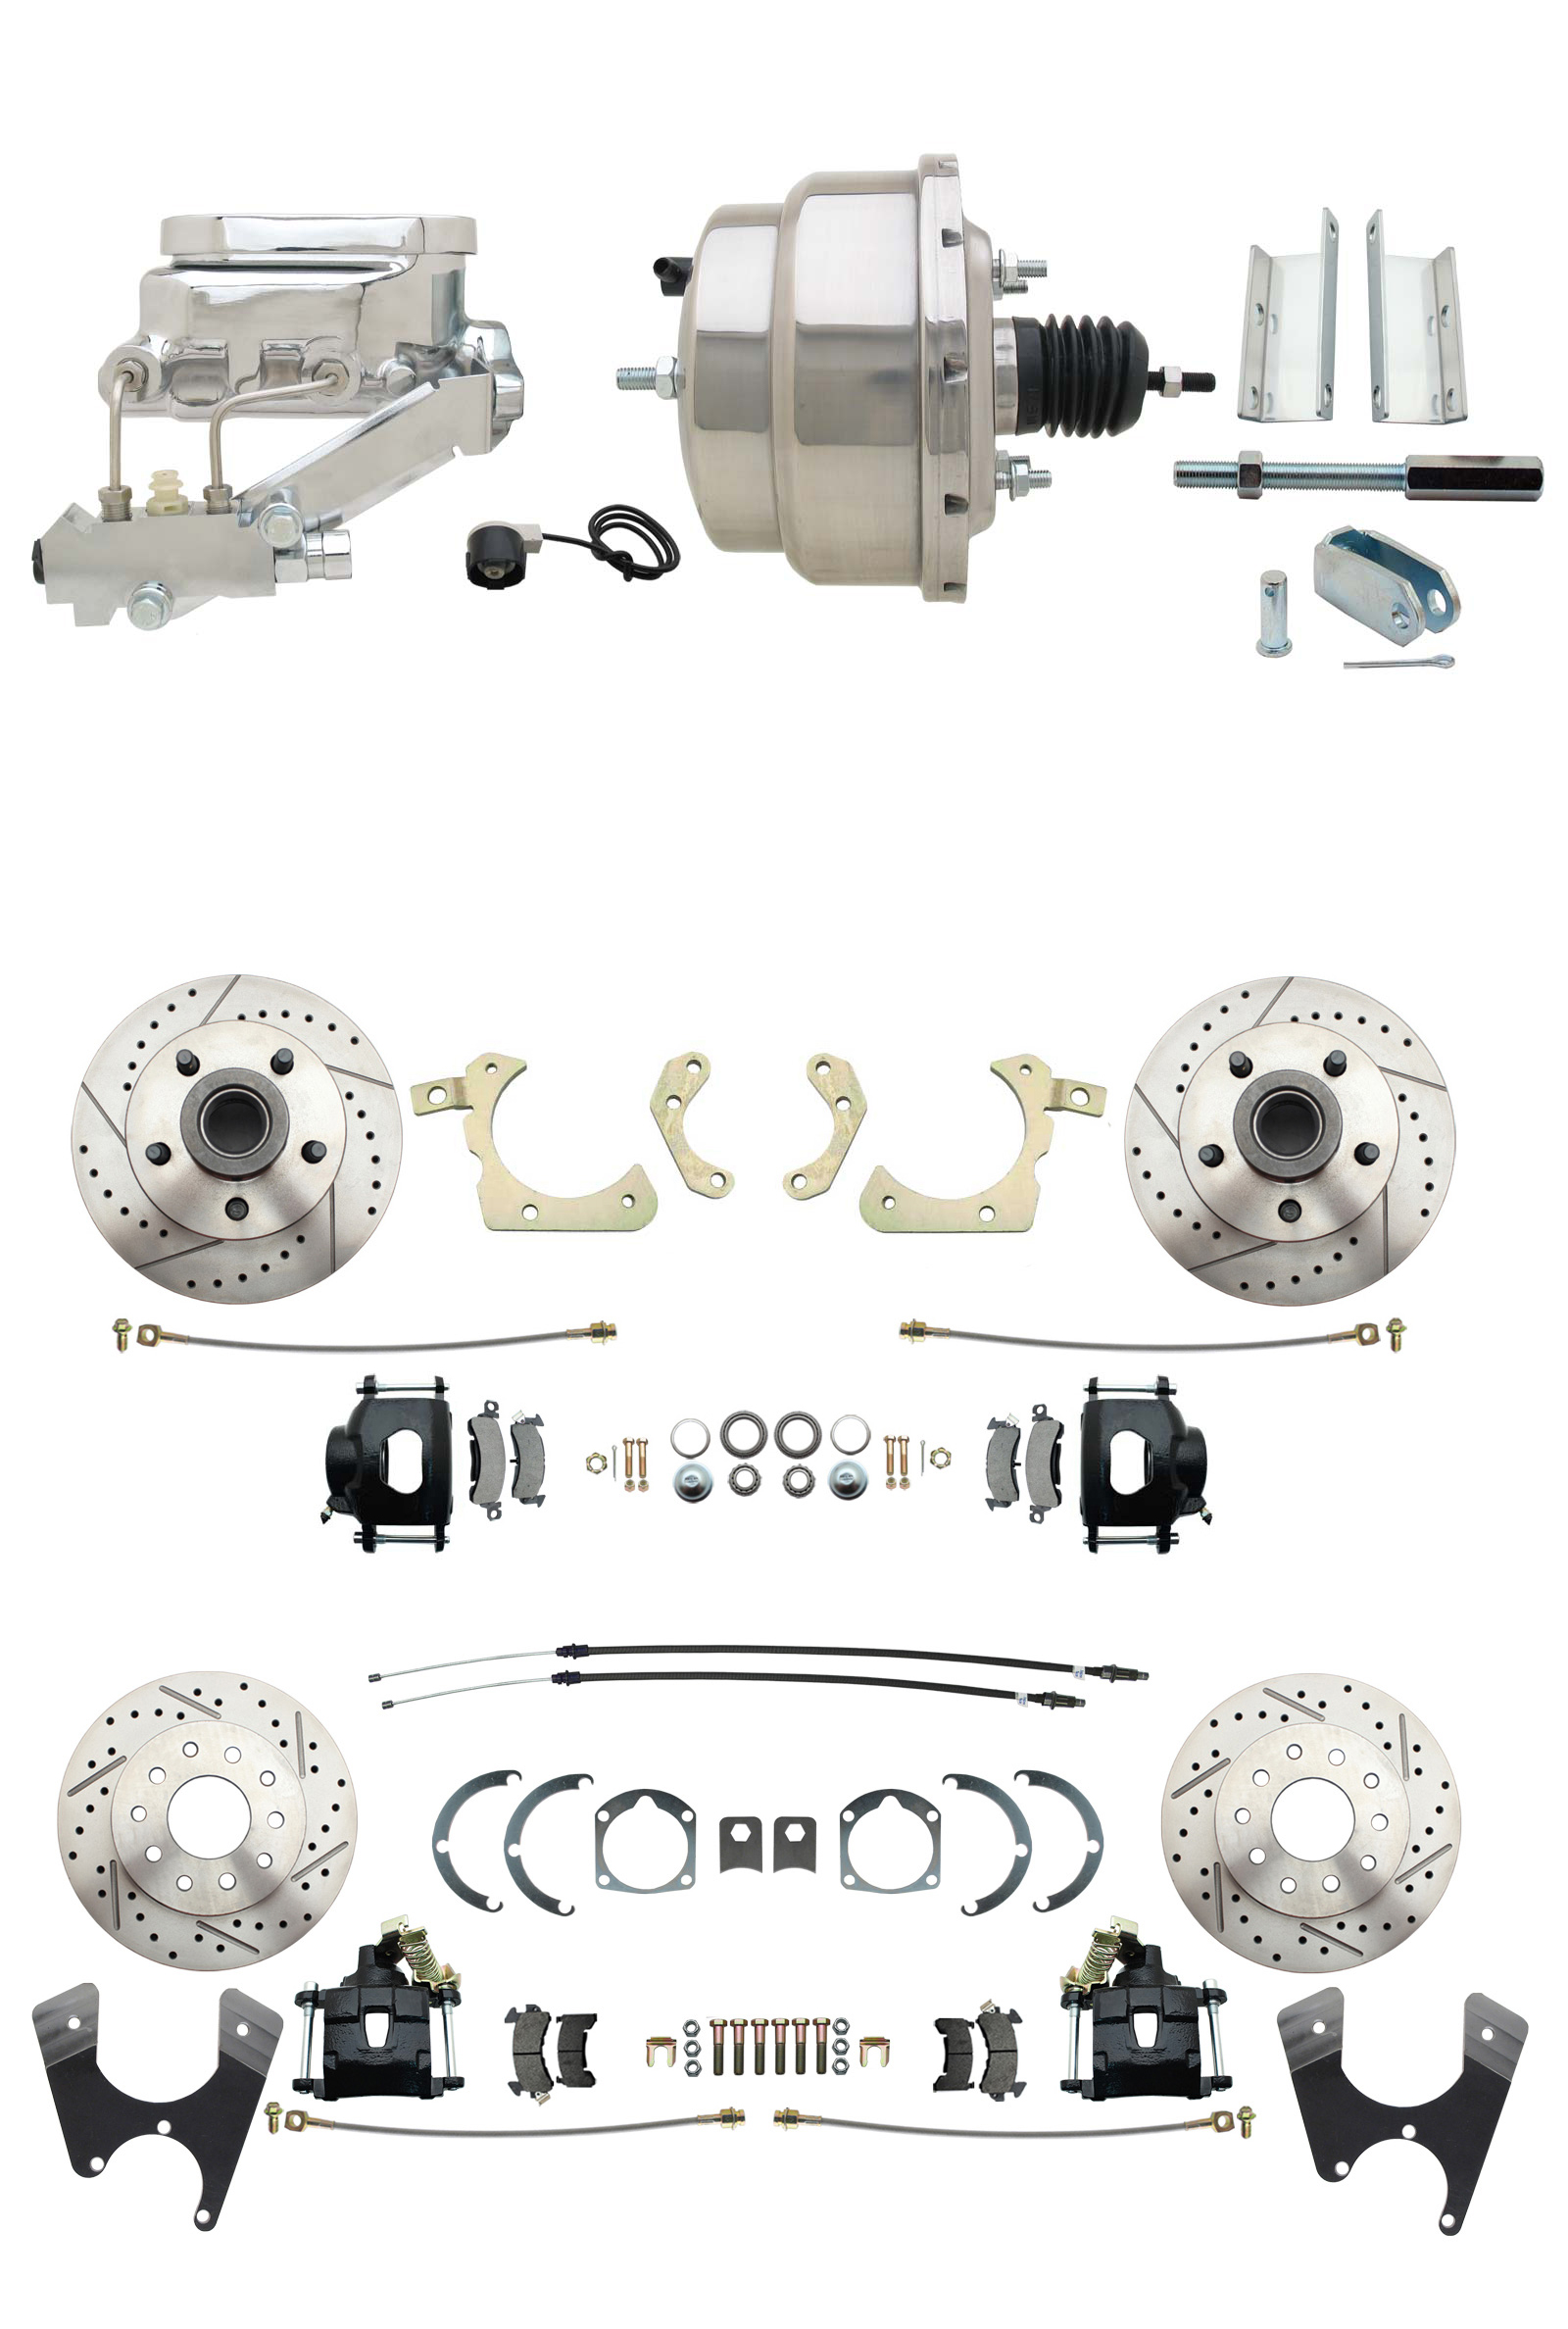 1955-1958 GM Full Size Front & Rear Power Disc Brake Kit Black Powder Coated Calipers Drilled/Slotted Rotors (Impala, Bel Air, Biscayne) & 8 Dual Stainless Steel Booster Conversion Kit W/ Chrome Flat Top Master Cylinder